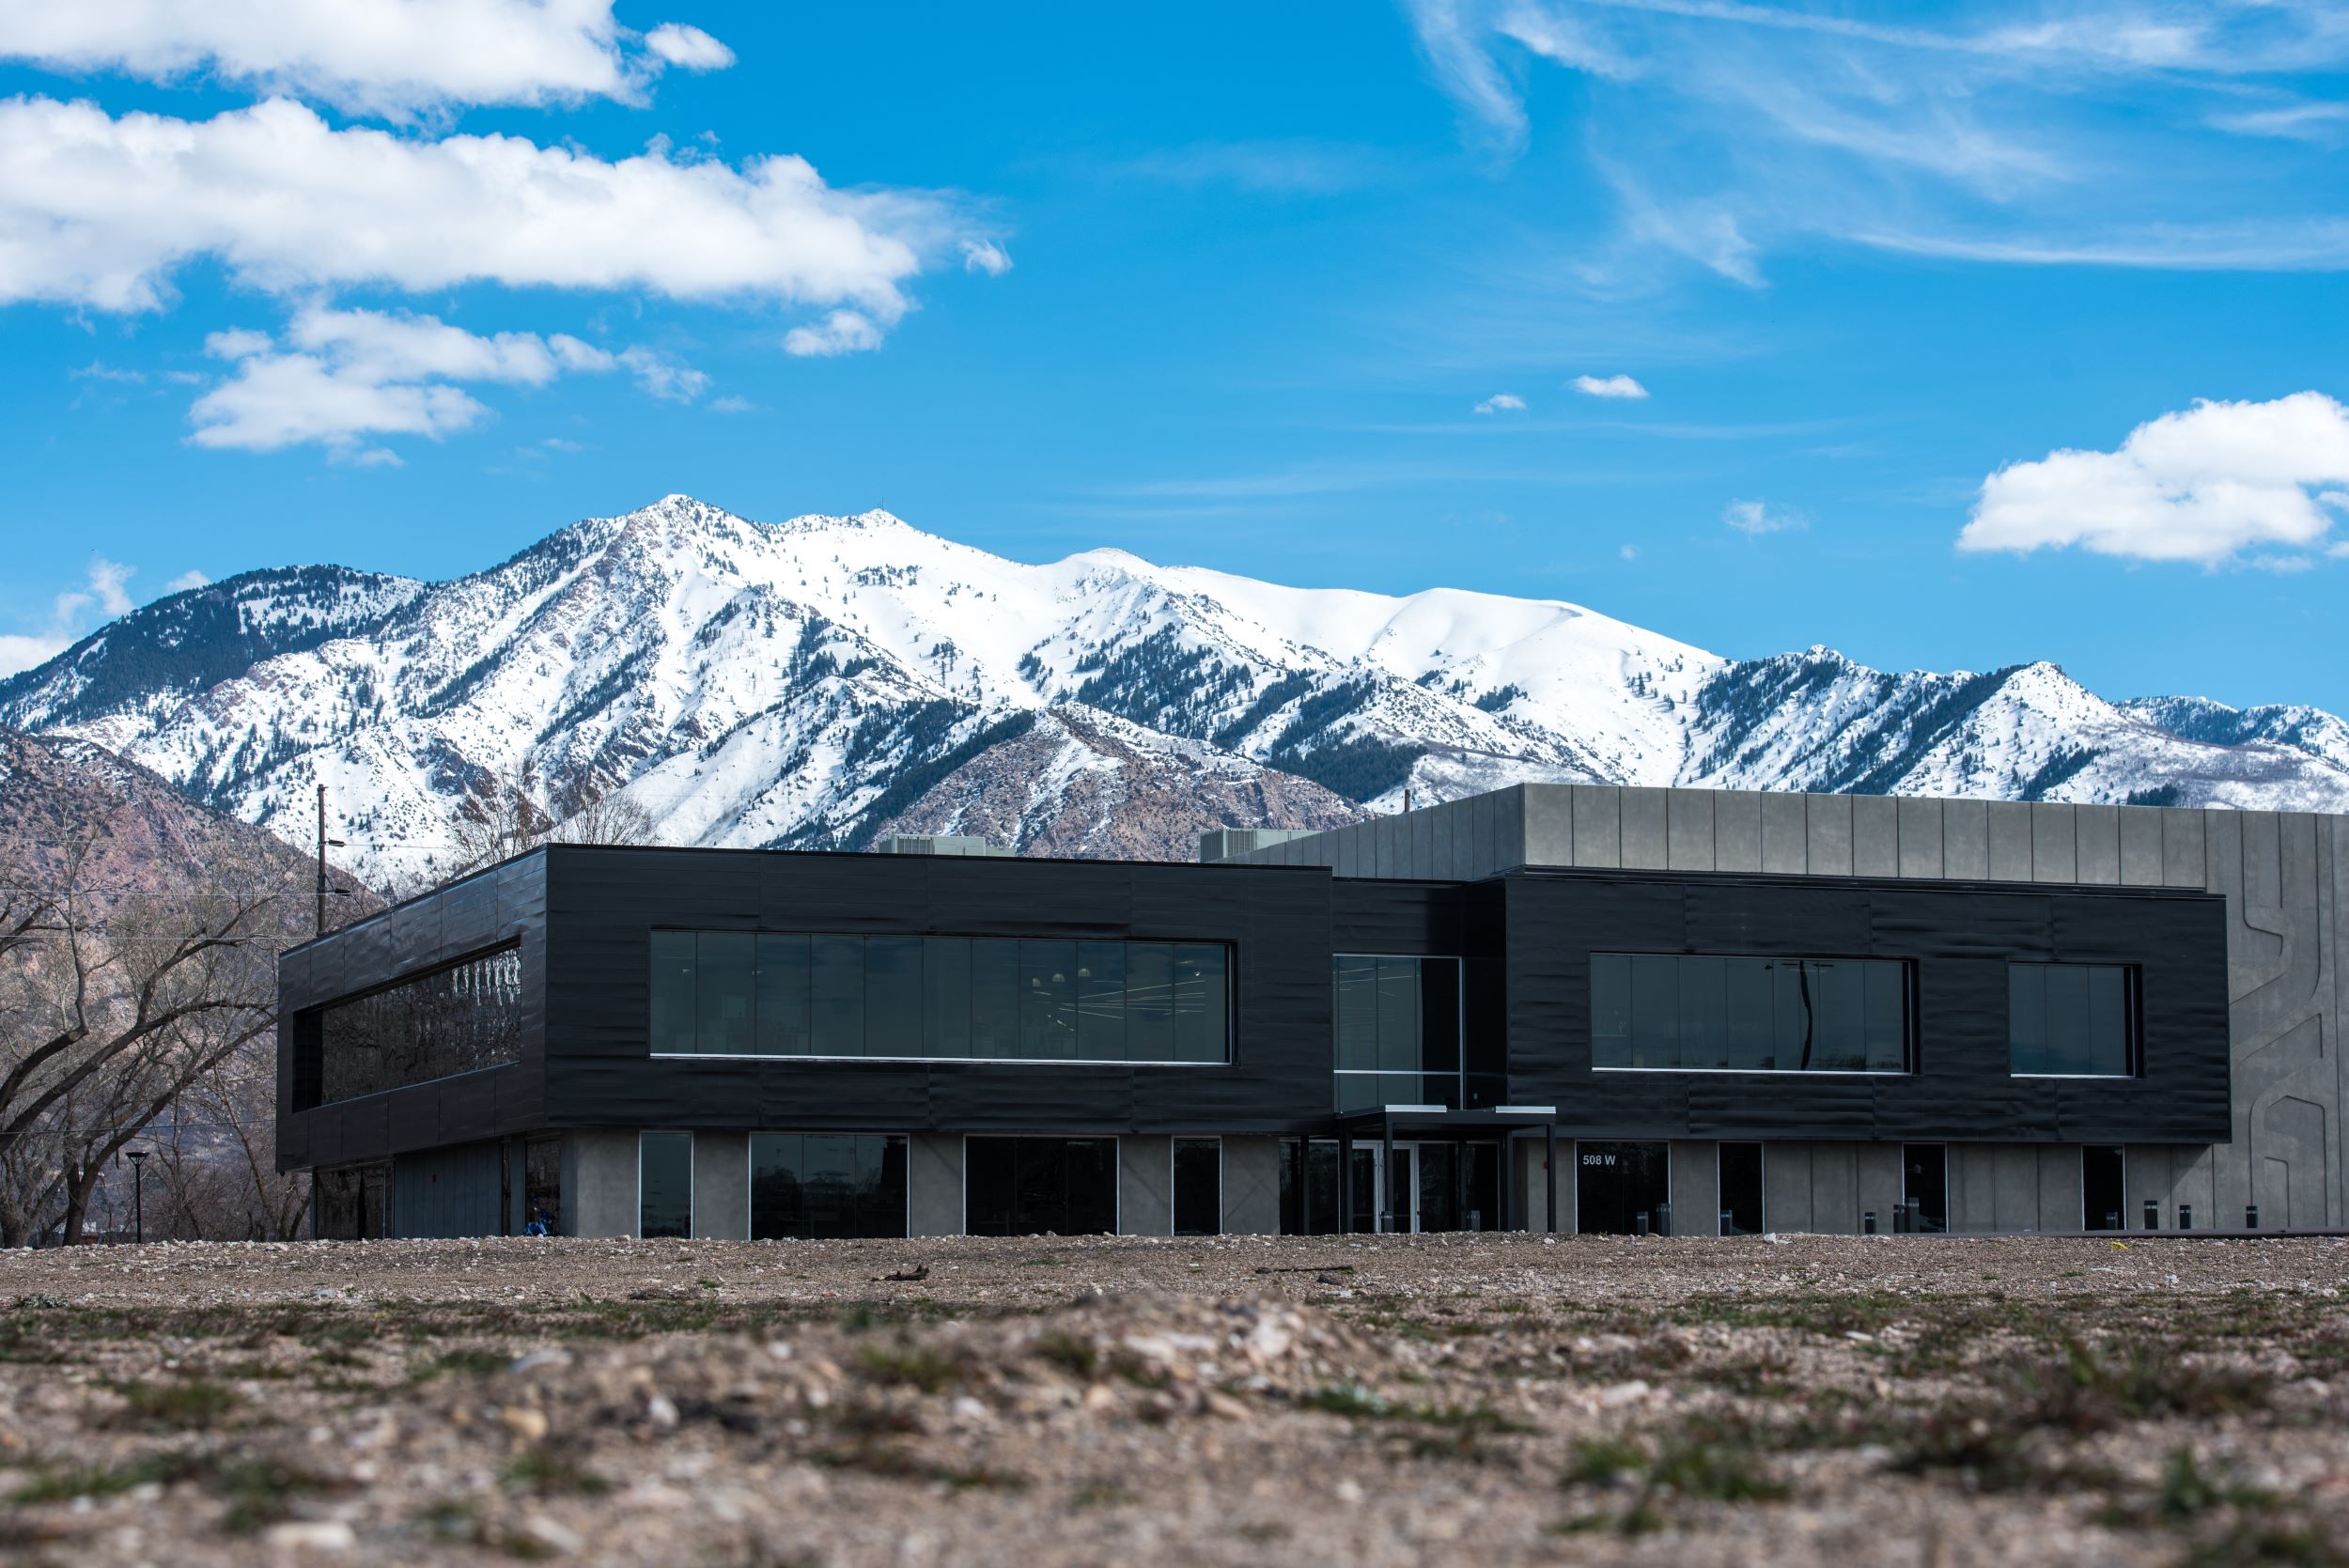 ENVE Composites Acquired by Utah-Based PV3 Investments from Amer Sports